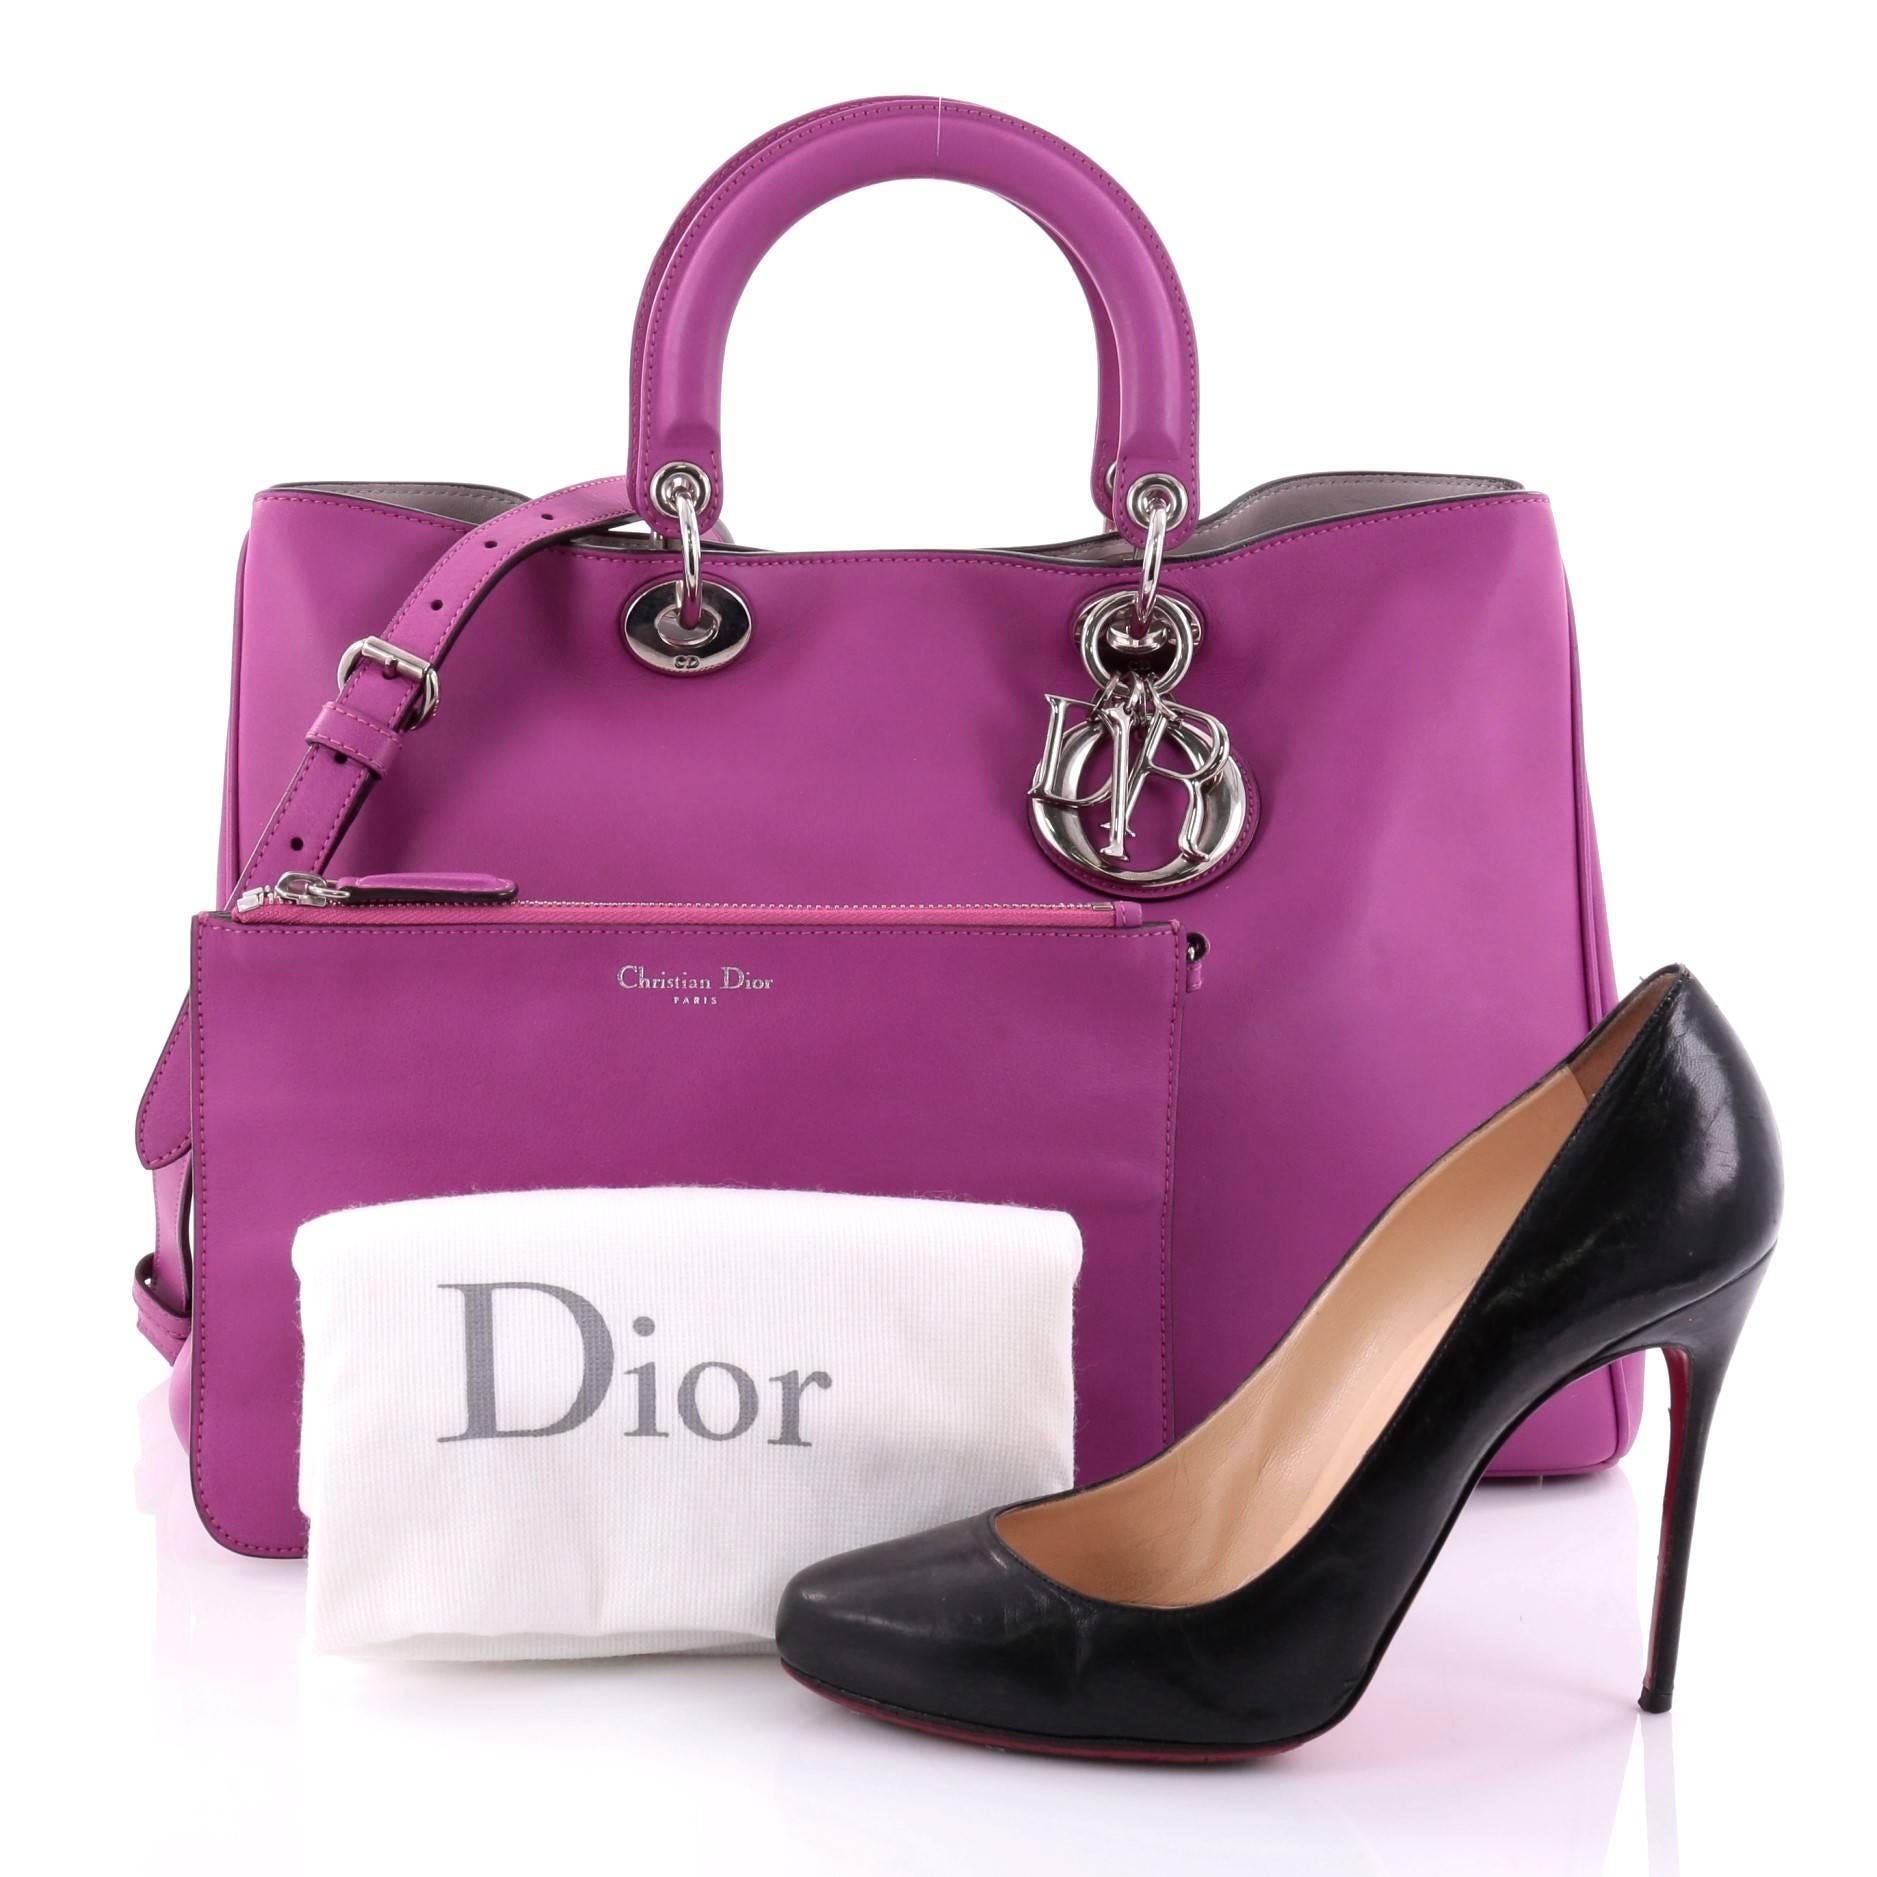 This authentic Christian Dior Diorissimo Tote Smooth Calfskin Large is an elegant, classic statement piece that every fashionista needs in her wardrobe. Crafted from bright purple leather, this chic tote features smooth short dual handles with sleek